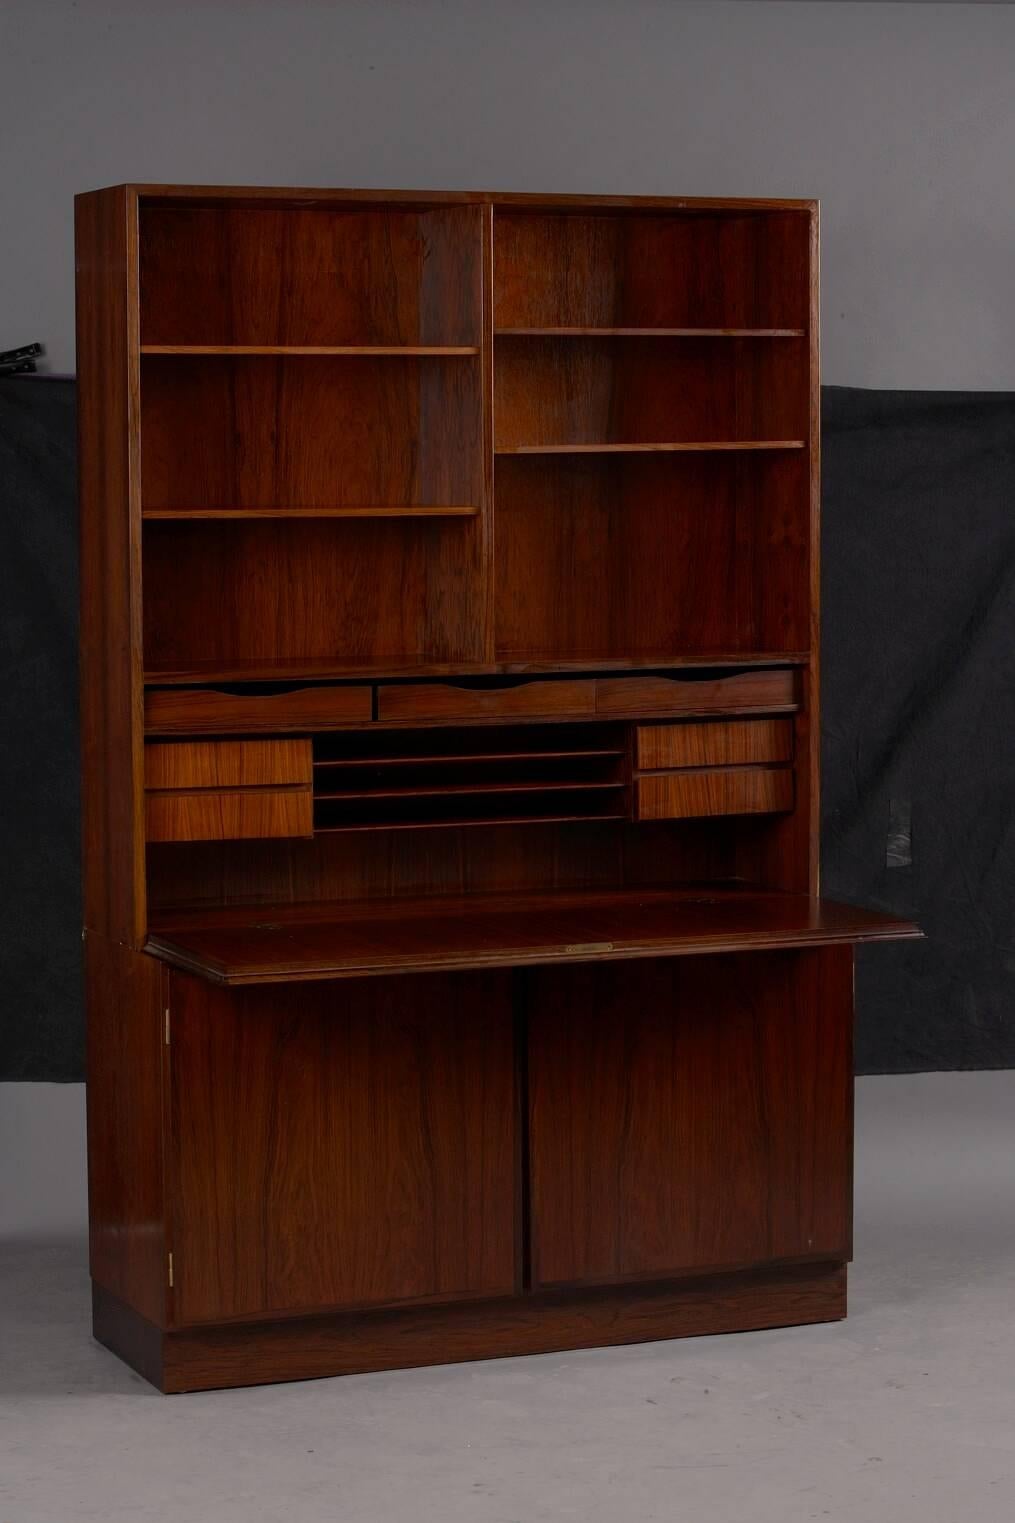 Danish rosewood wall unit and desk by Gunni Omann for Omann Jun.

Measure: Base 47.25in L x 17in D x 27in H; bookcase: 47.25in L x 12in D x 46.75in H.